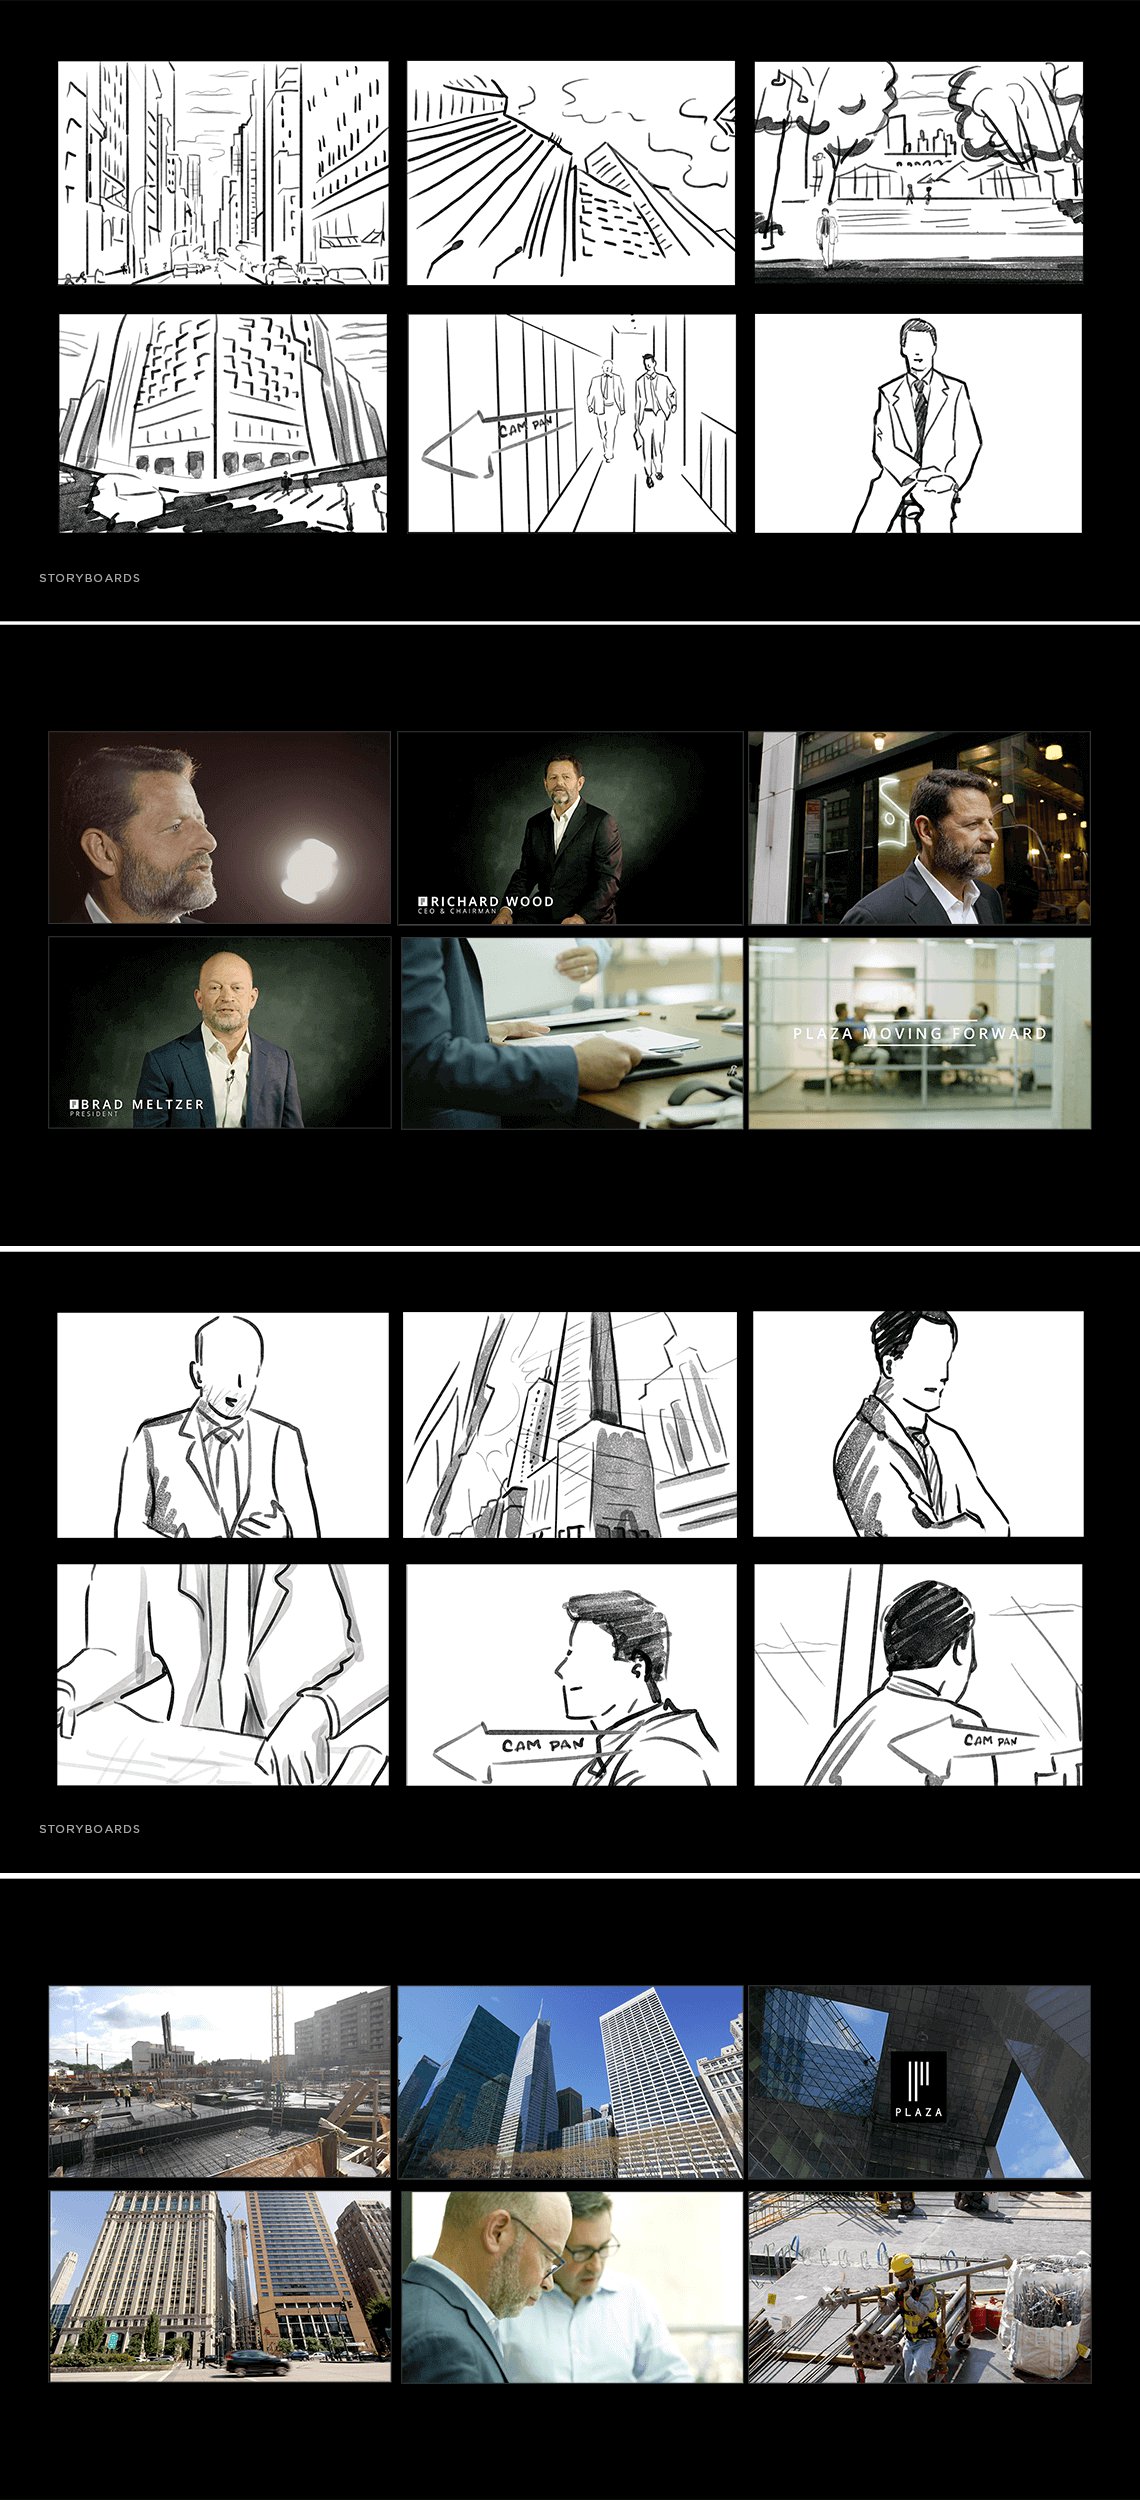 Jacober Creative Brand Identity for Plaza Construction - Photo of storyboard sketches compared to final video shot